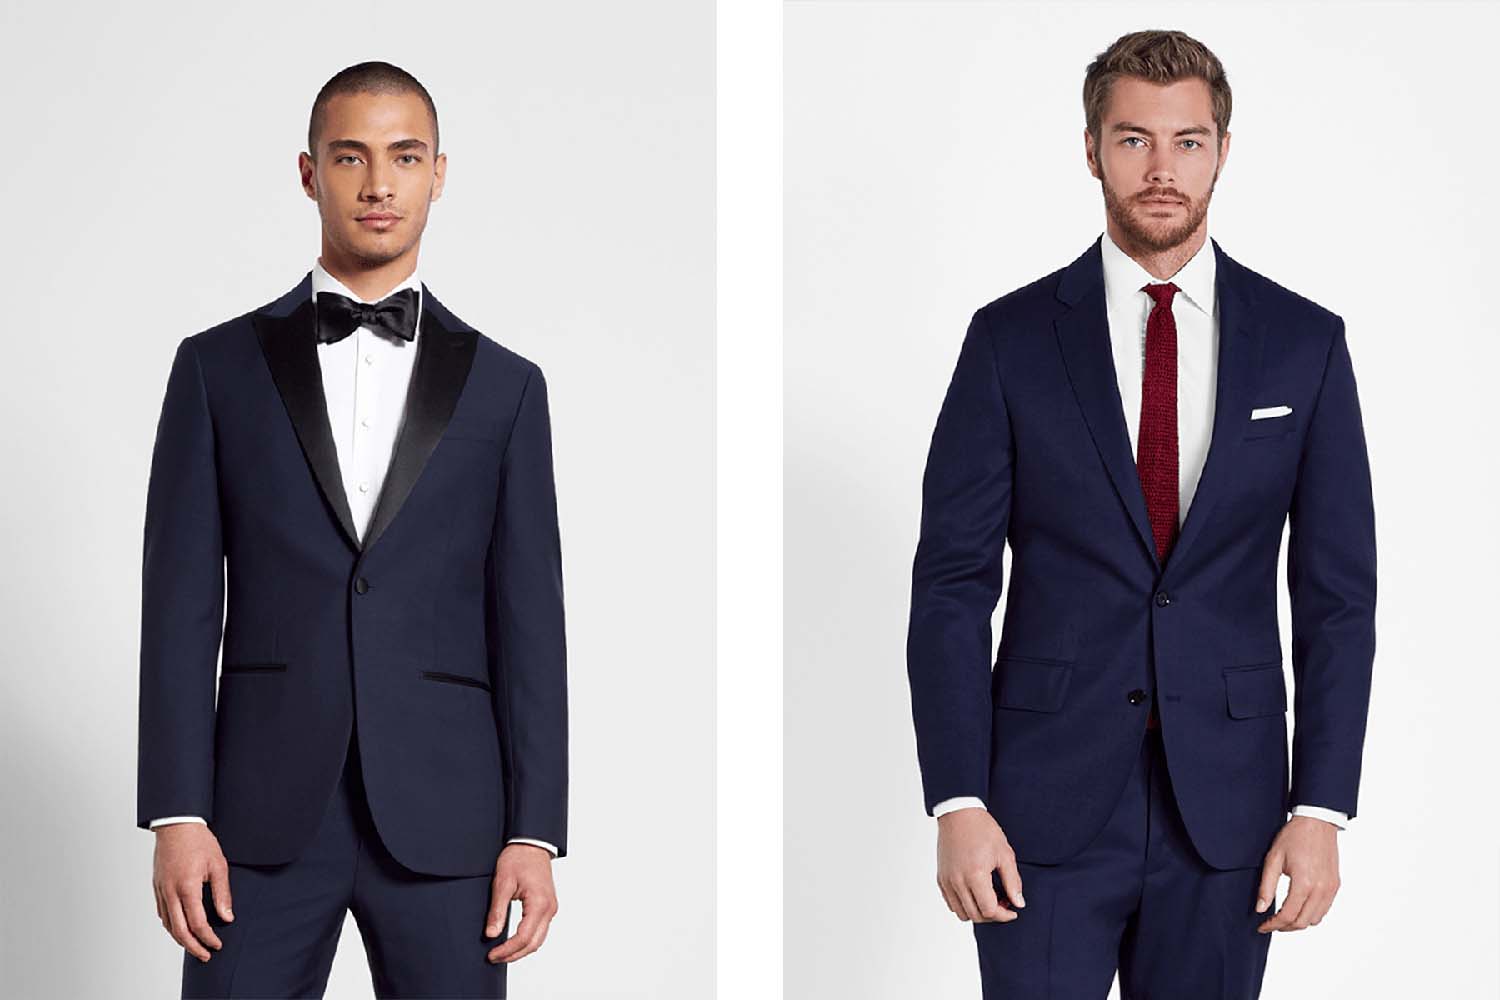 Should I wear a Tuxedo or a Suit for my wedding?